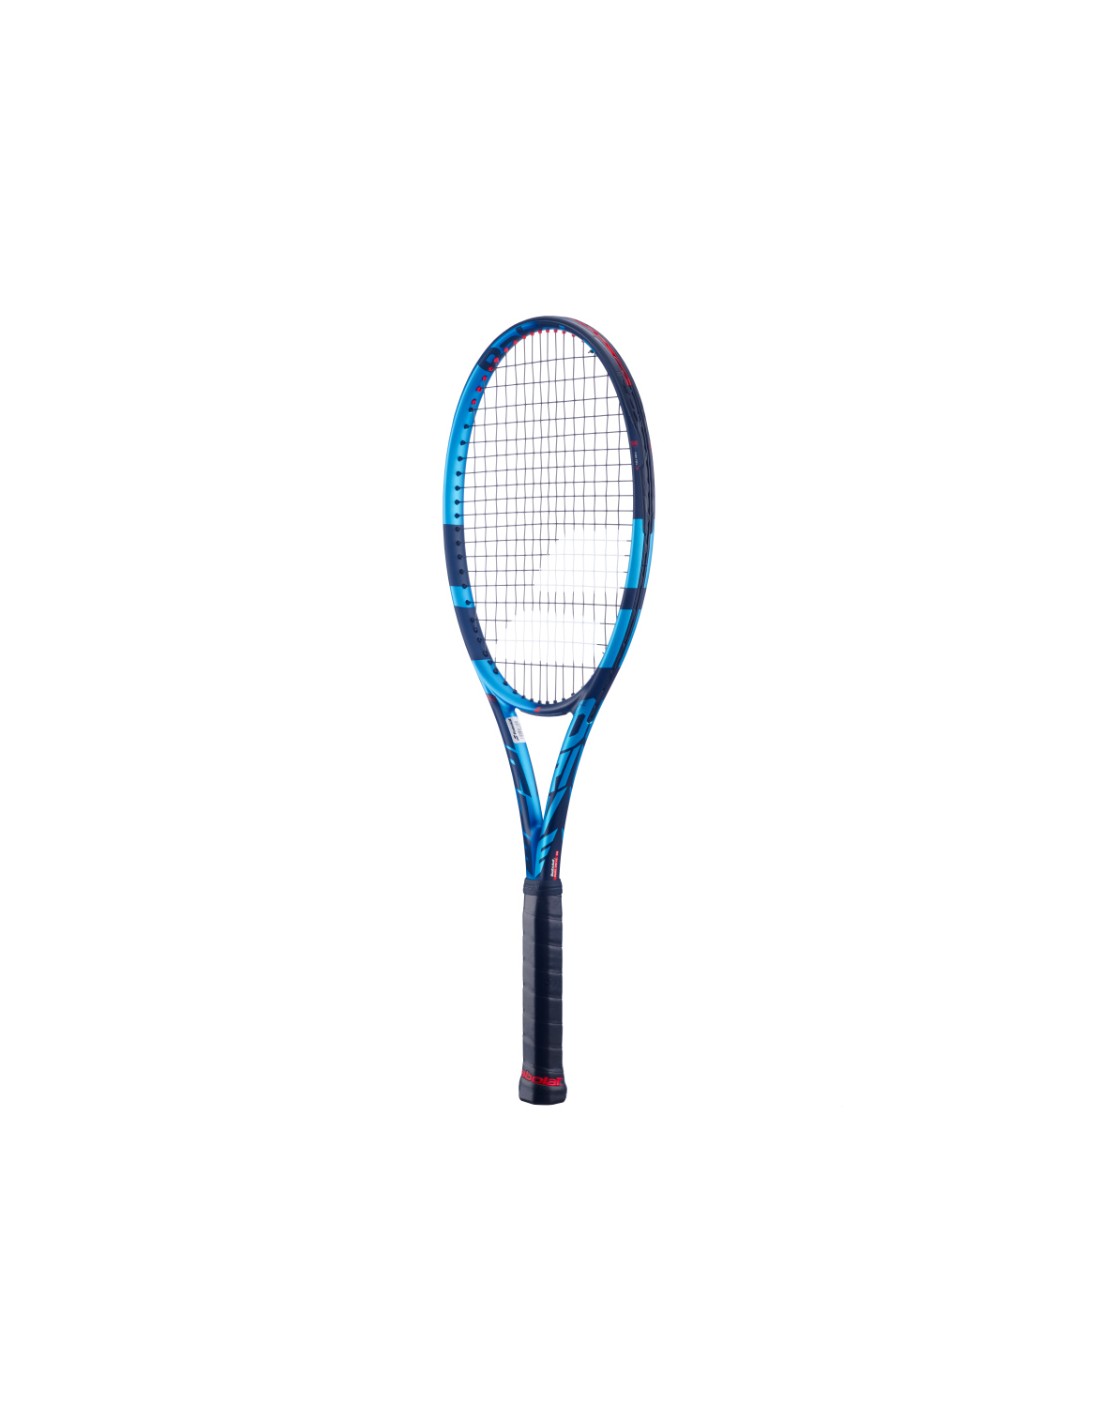 PACK BABOLAT PURE DRIVE 98 x2 305 GR 2023 RACKETS |Onlytenis